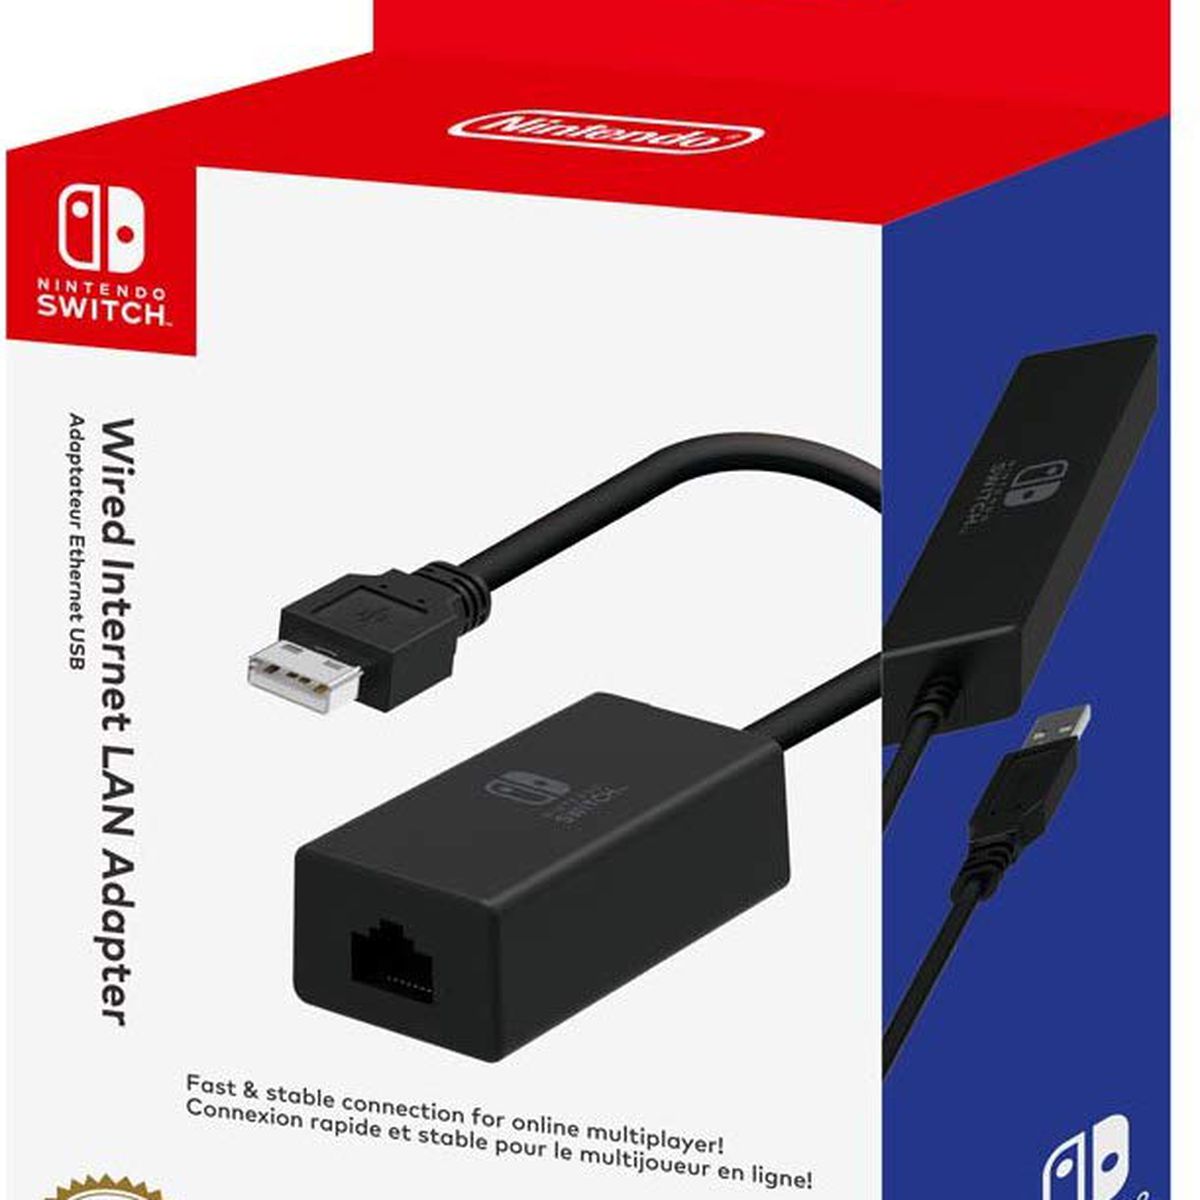 The box for Hori’s LAN adapter for Nintendo Switch 